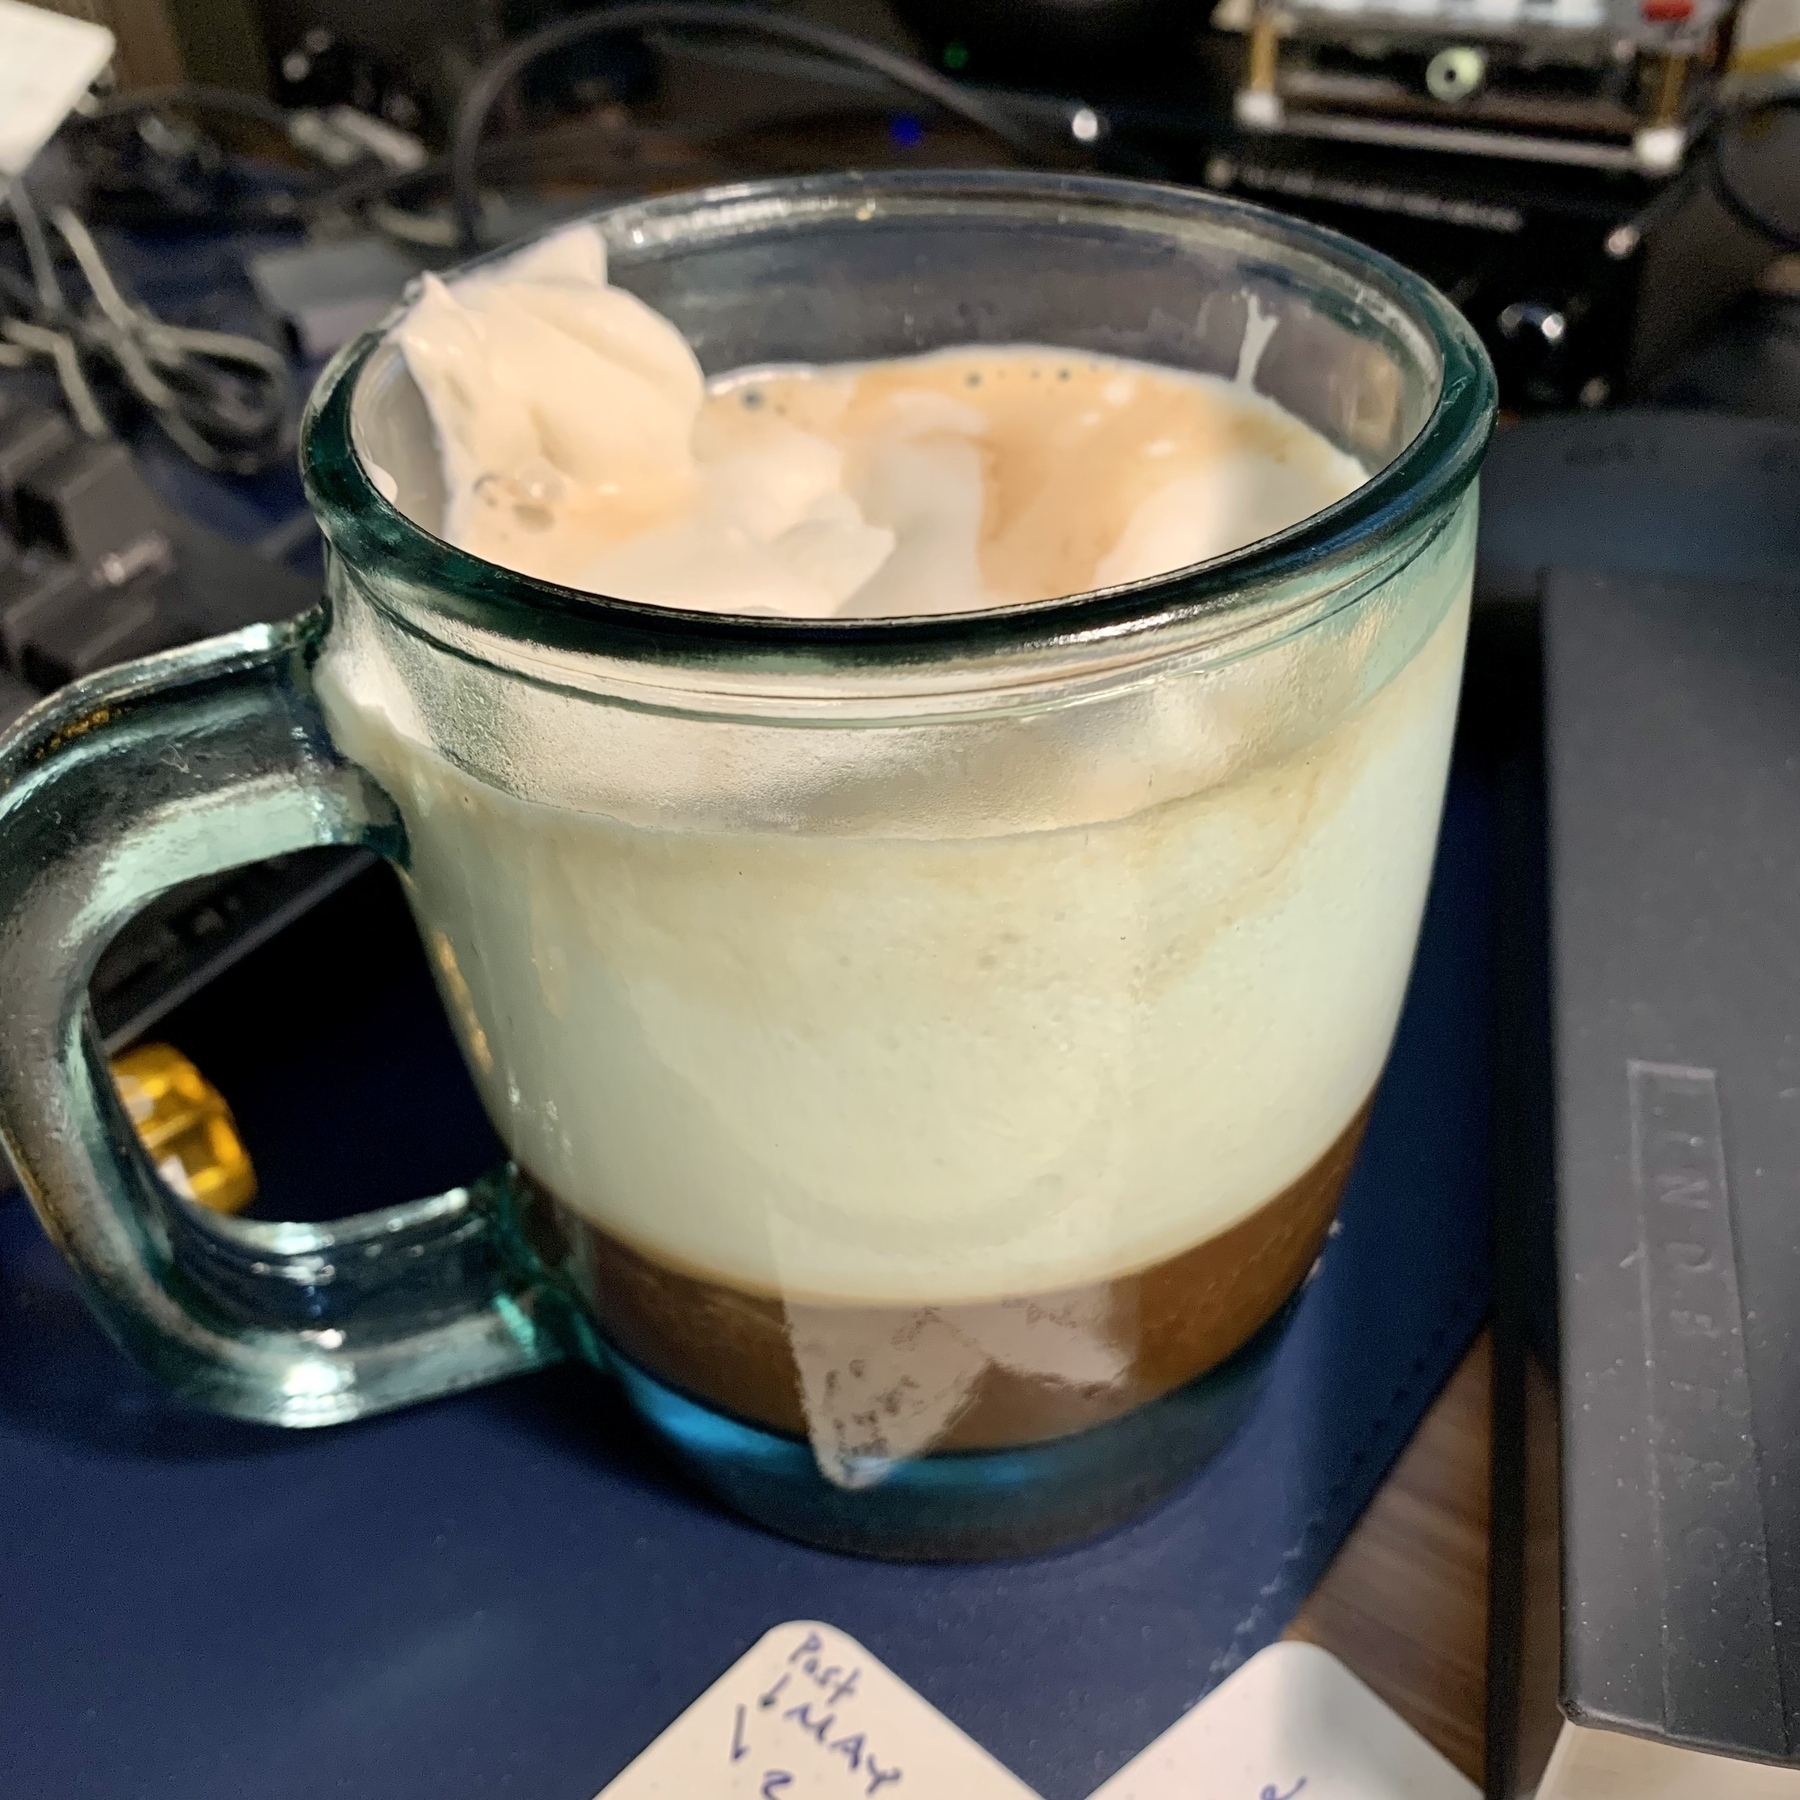 A mug of coffee with whipped cream on top.